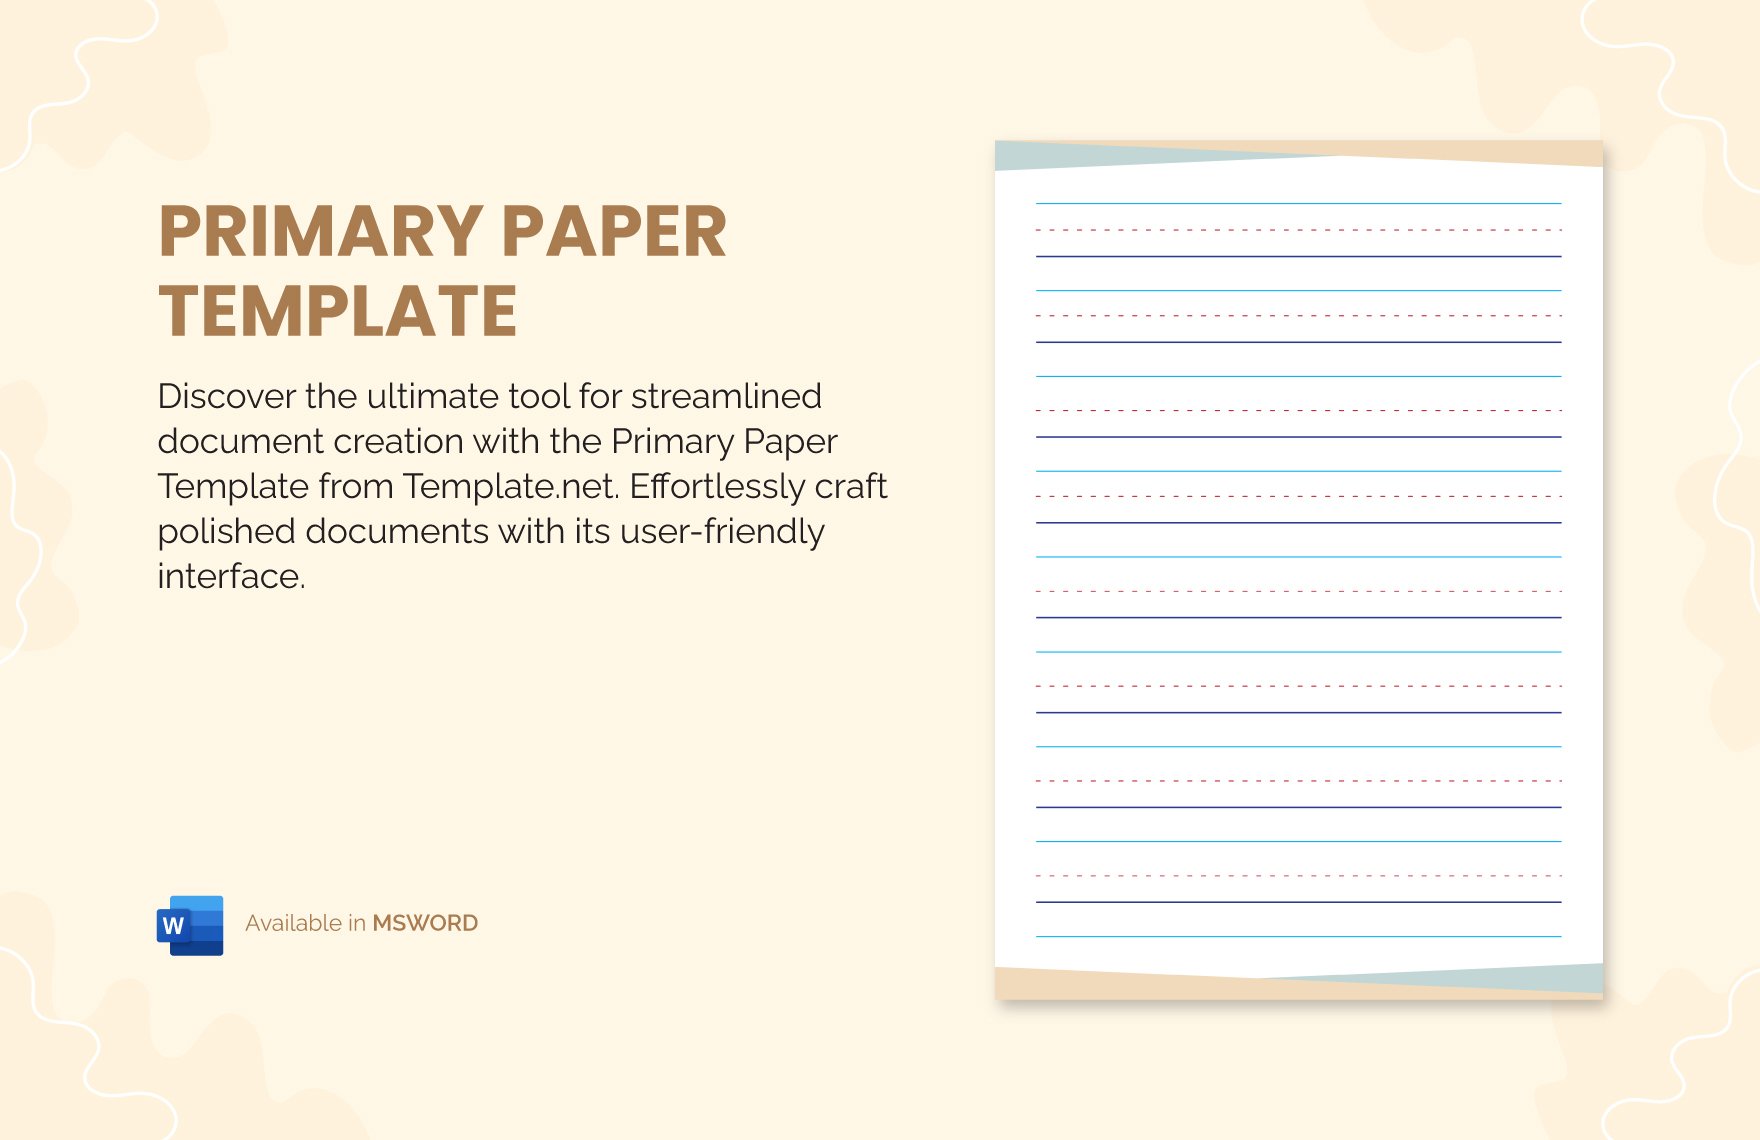 Primary Paper Template